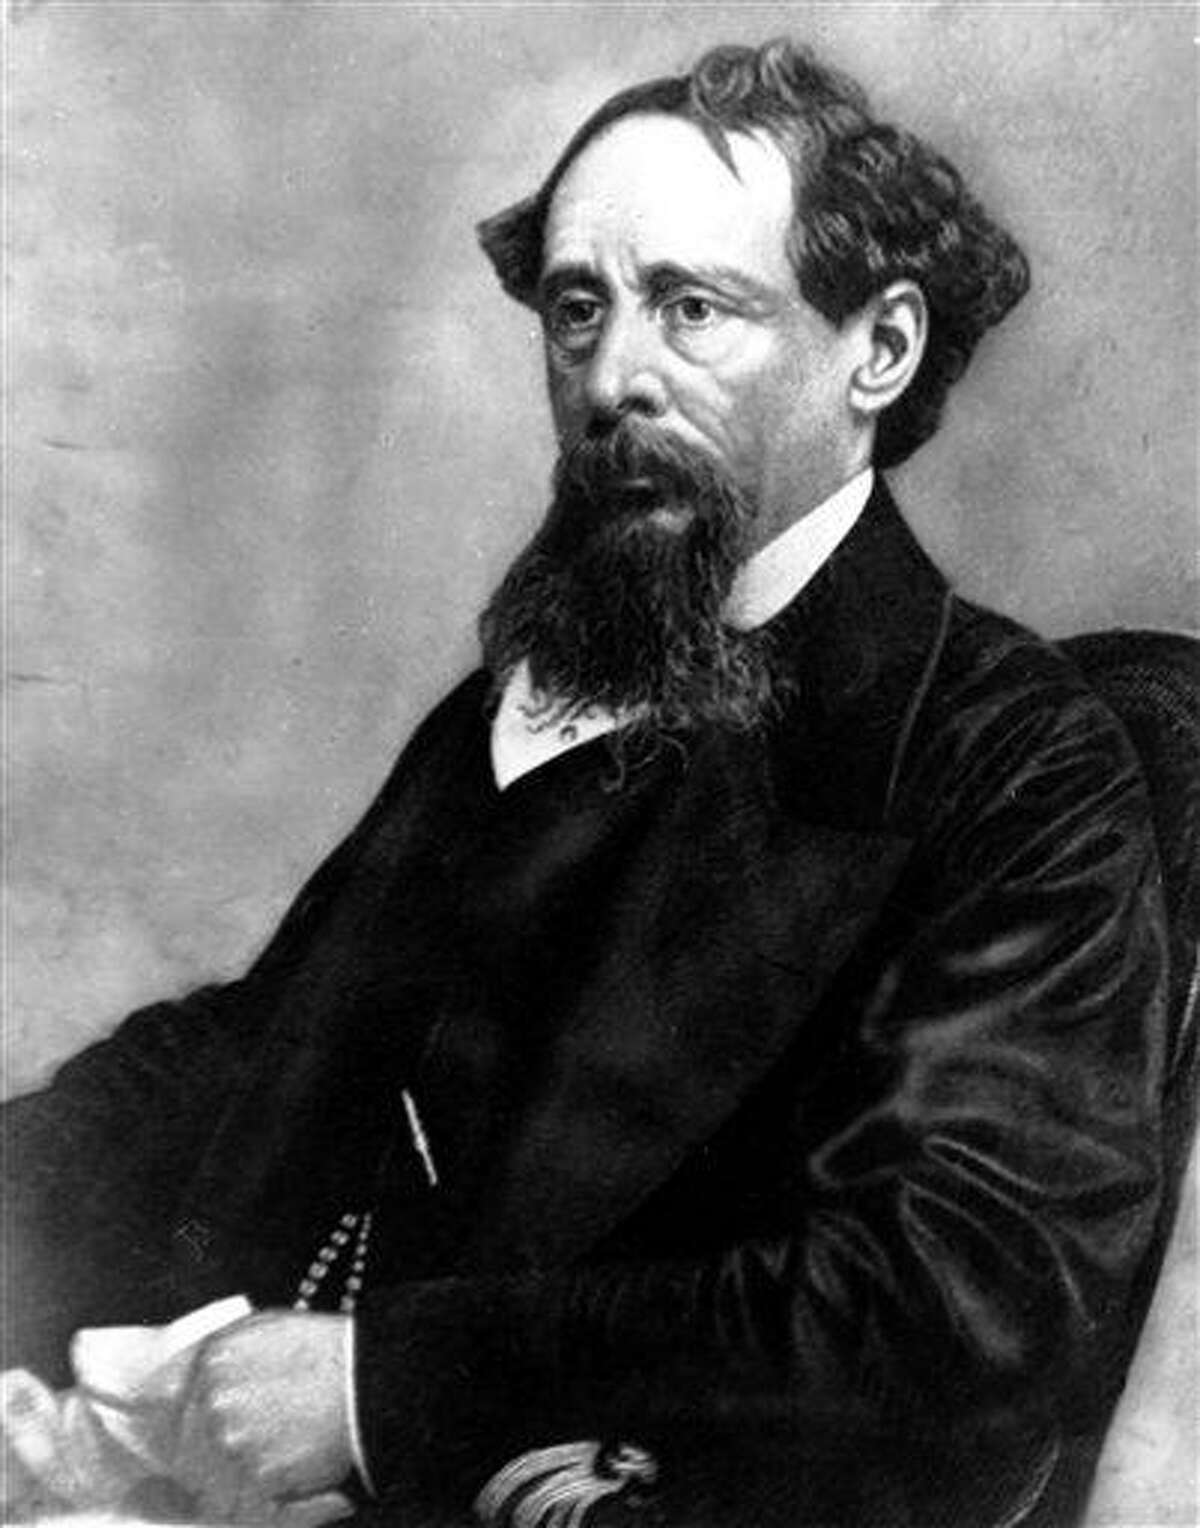 In this undated file photo, novelist Charles Dickens poses for a photograph. Britain's Prince Charles will lay a wreath Tuesday on the writer's grave in Westminster Abbey's Poet's Corner to mark his 200th of birthday. Associated Press